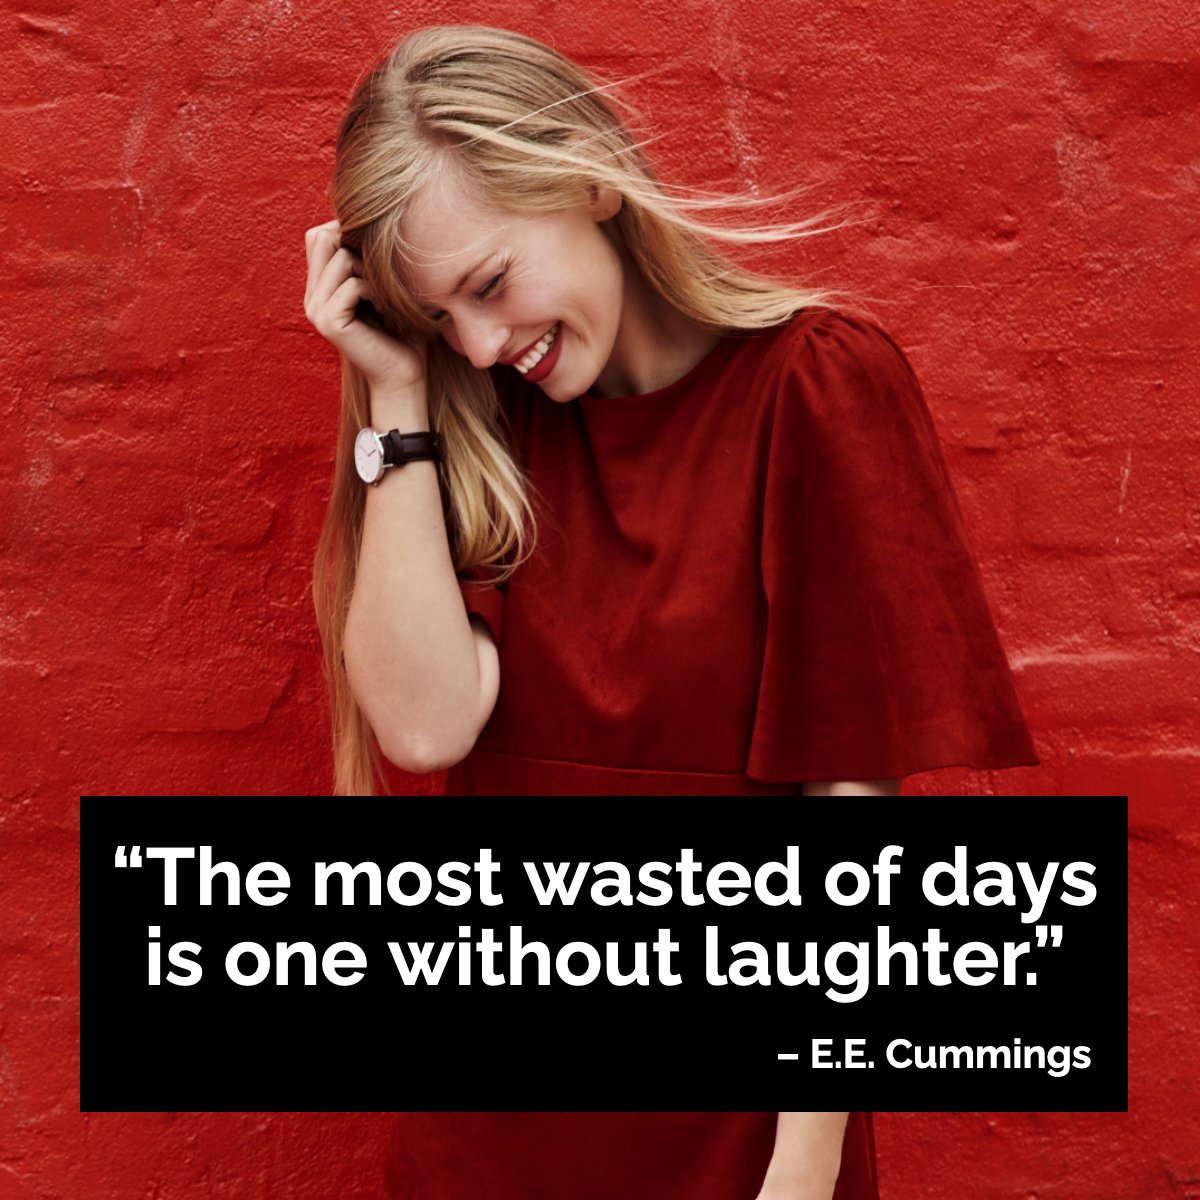 Laughter is one of the most valuable things in your life. 💯

#wisdomquote #wisdomoftheday #quotegram #quoteoftheday  #eecummings
 #thefuentesteam